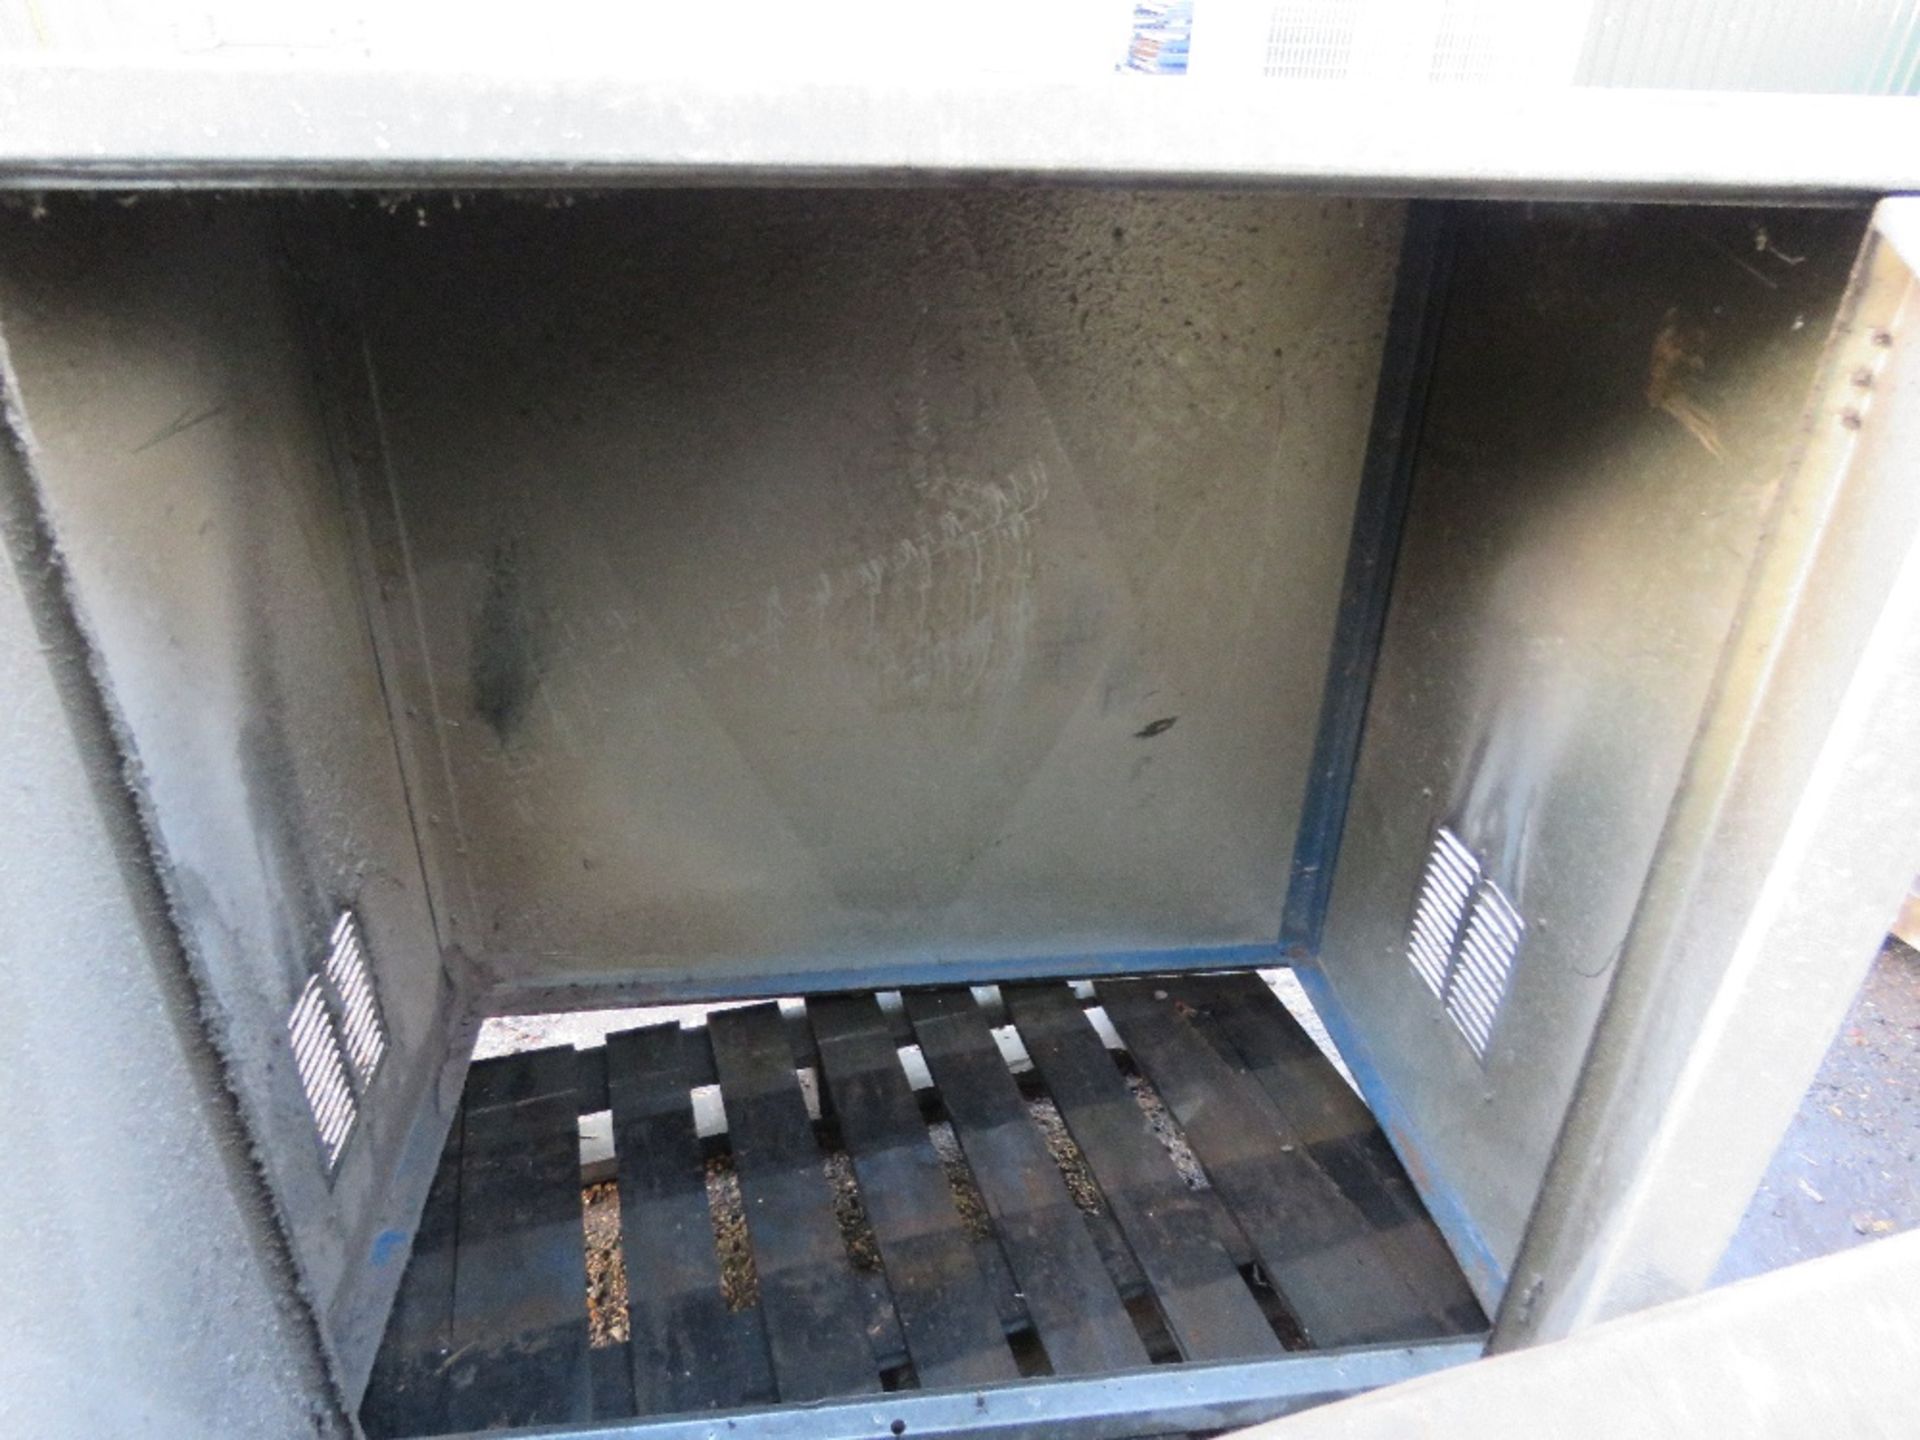 BOILER CABINET UNIT TO HOUSE BOILER OR STEAM CLEANER ETC THIS LOT IS SOLD UNDER THE AUCTIONEERS M - Image 2 of 3